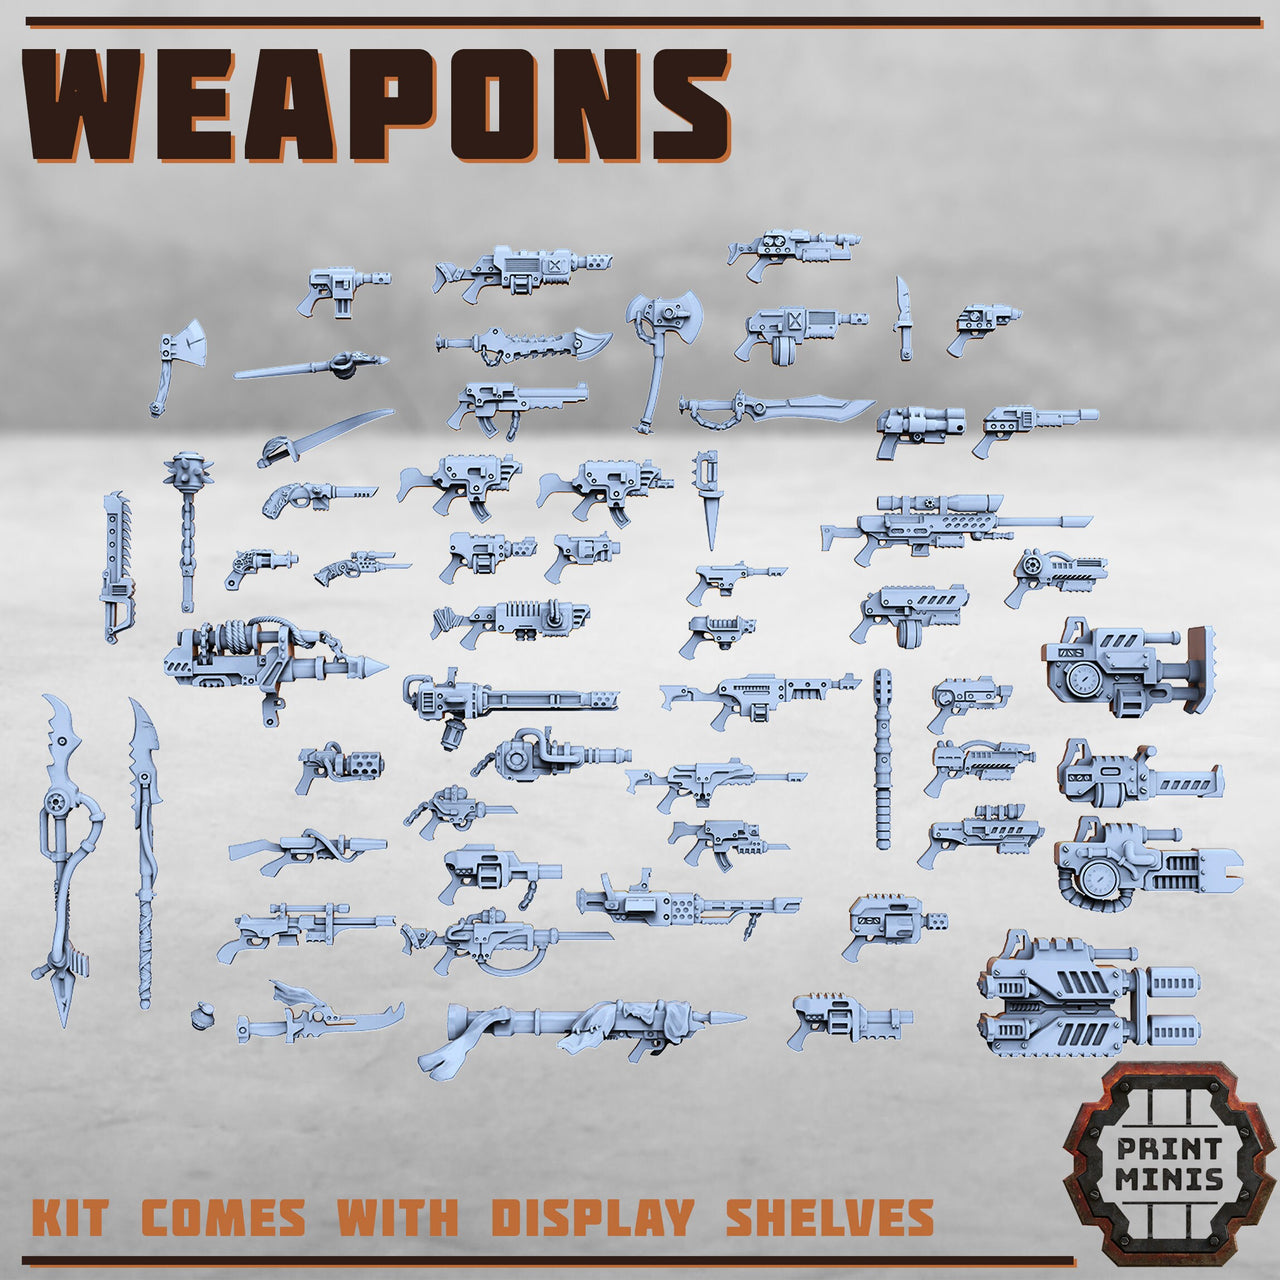 Weapons Kit for kitbashing - Print Minis | Sci Fi | Light Infantry | 28mm Heroic | Apocalypse | Scatter | Armory